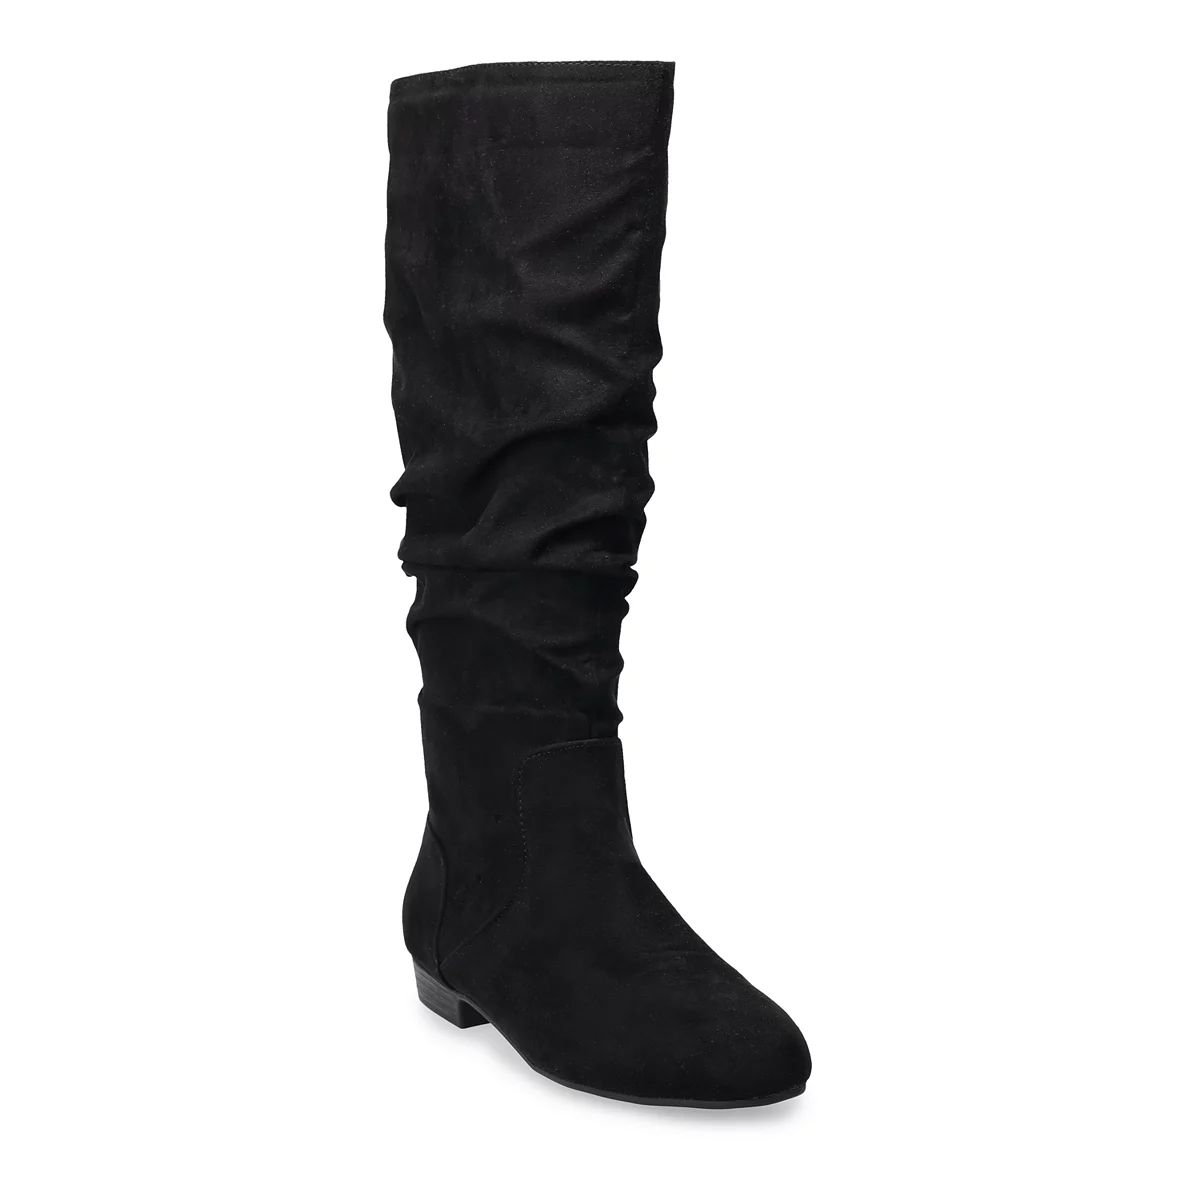 SO® Dill Women's Knee-High Boots | Kohl's